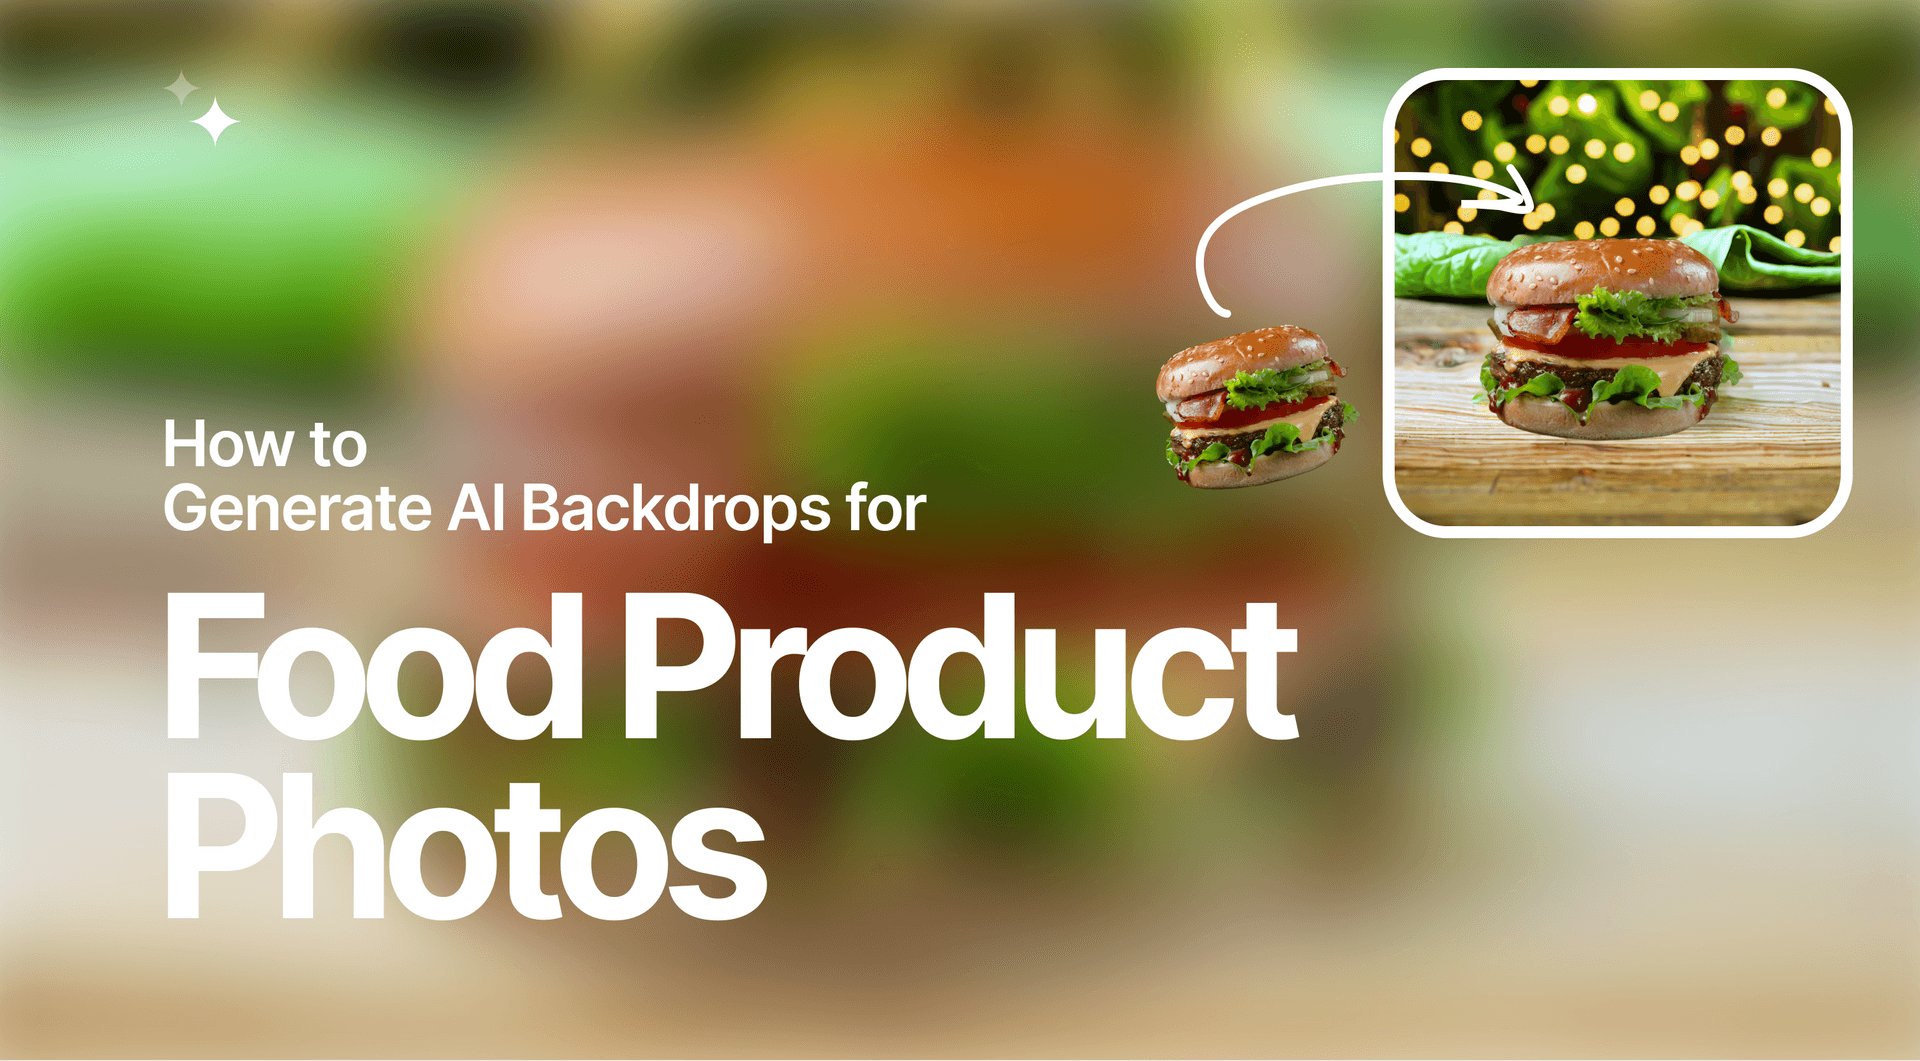 Picture for How to Generate AI Backdrops for Food Photos article